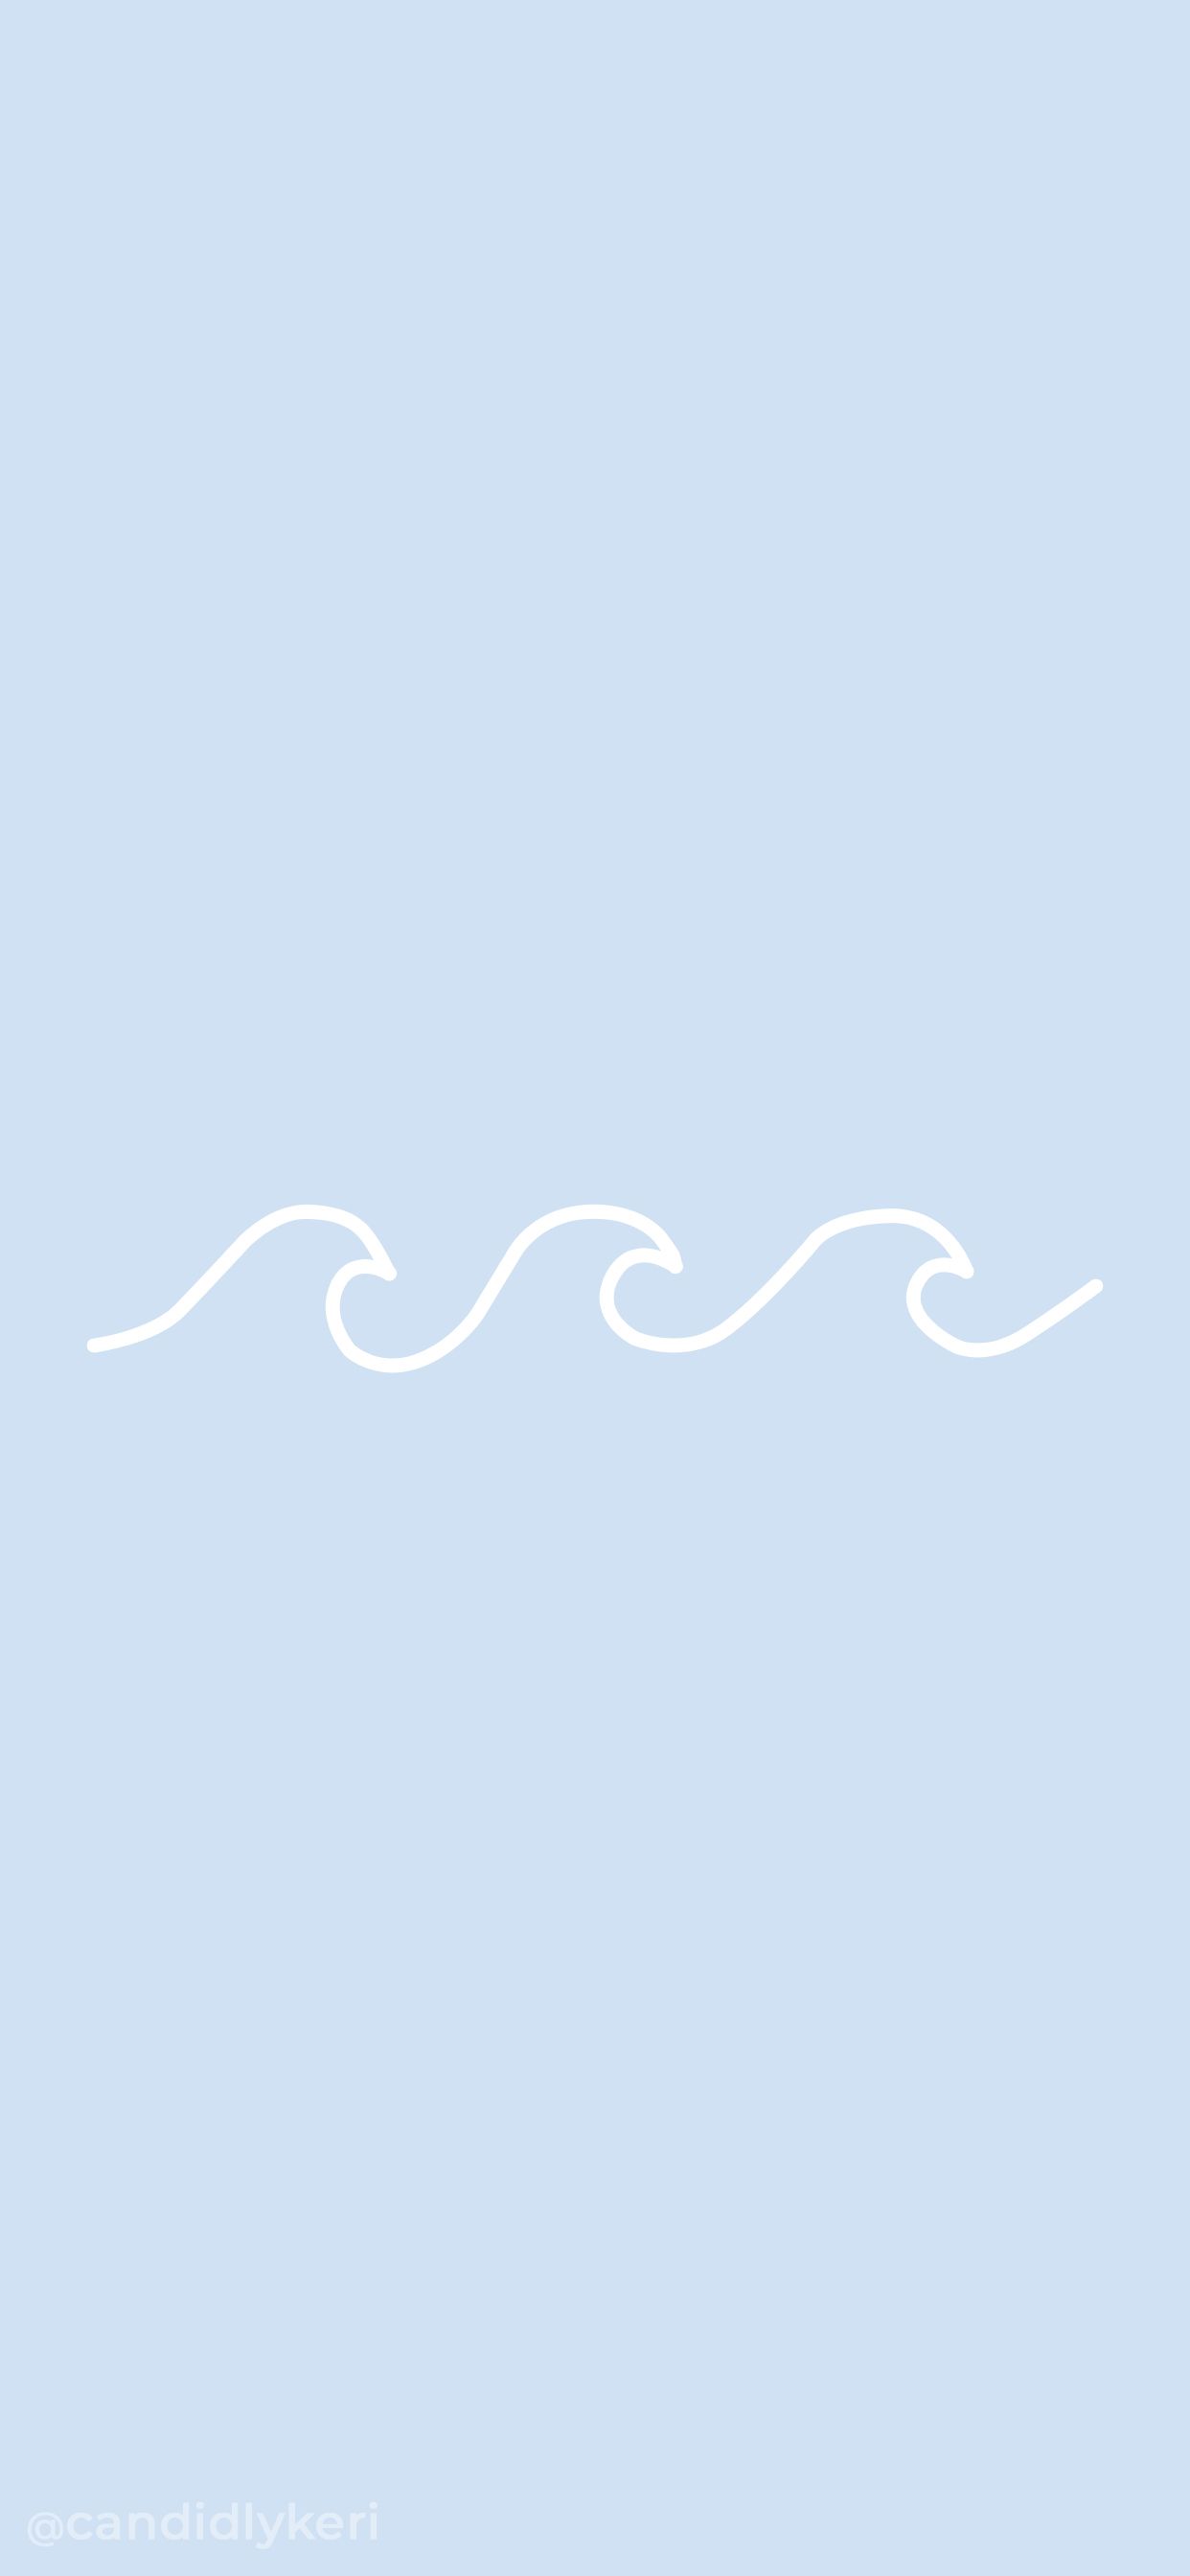 A wave is shown on the side of an image - Pastel blue